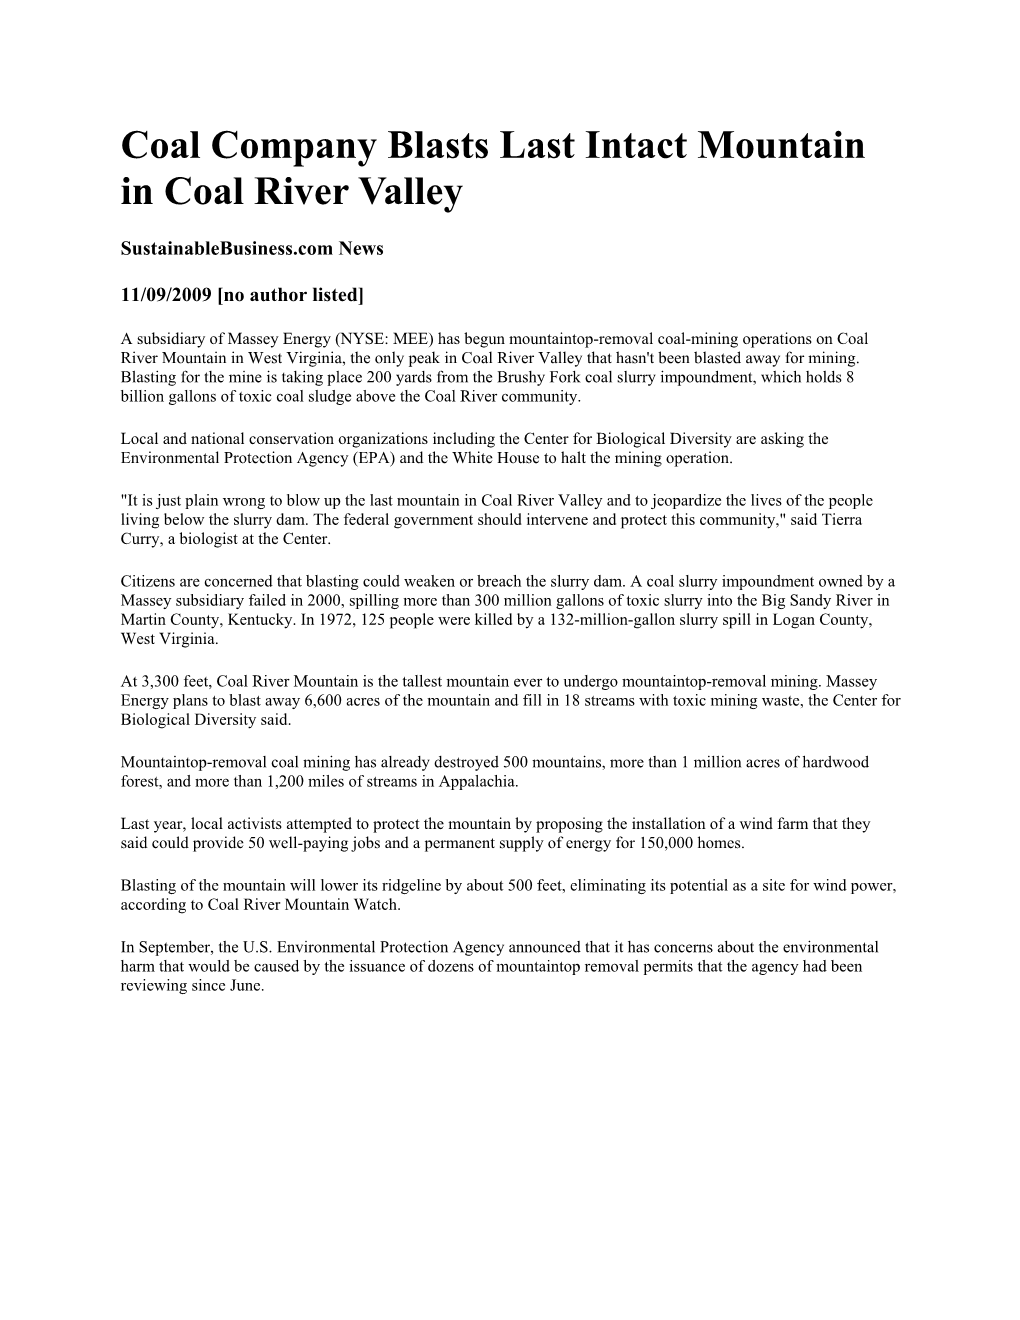 Coal Company Blasts Last Intact Mountain in Coal River Valley